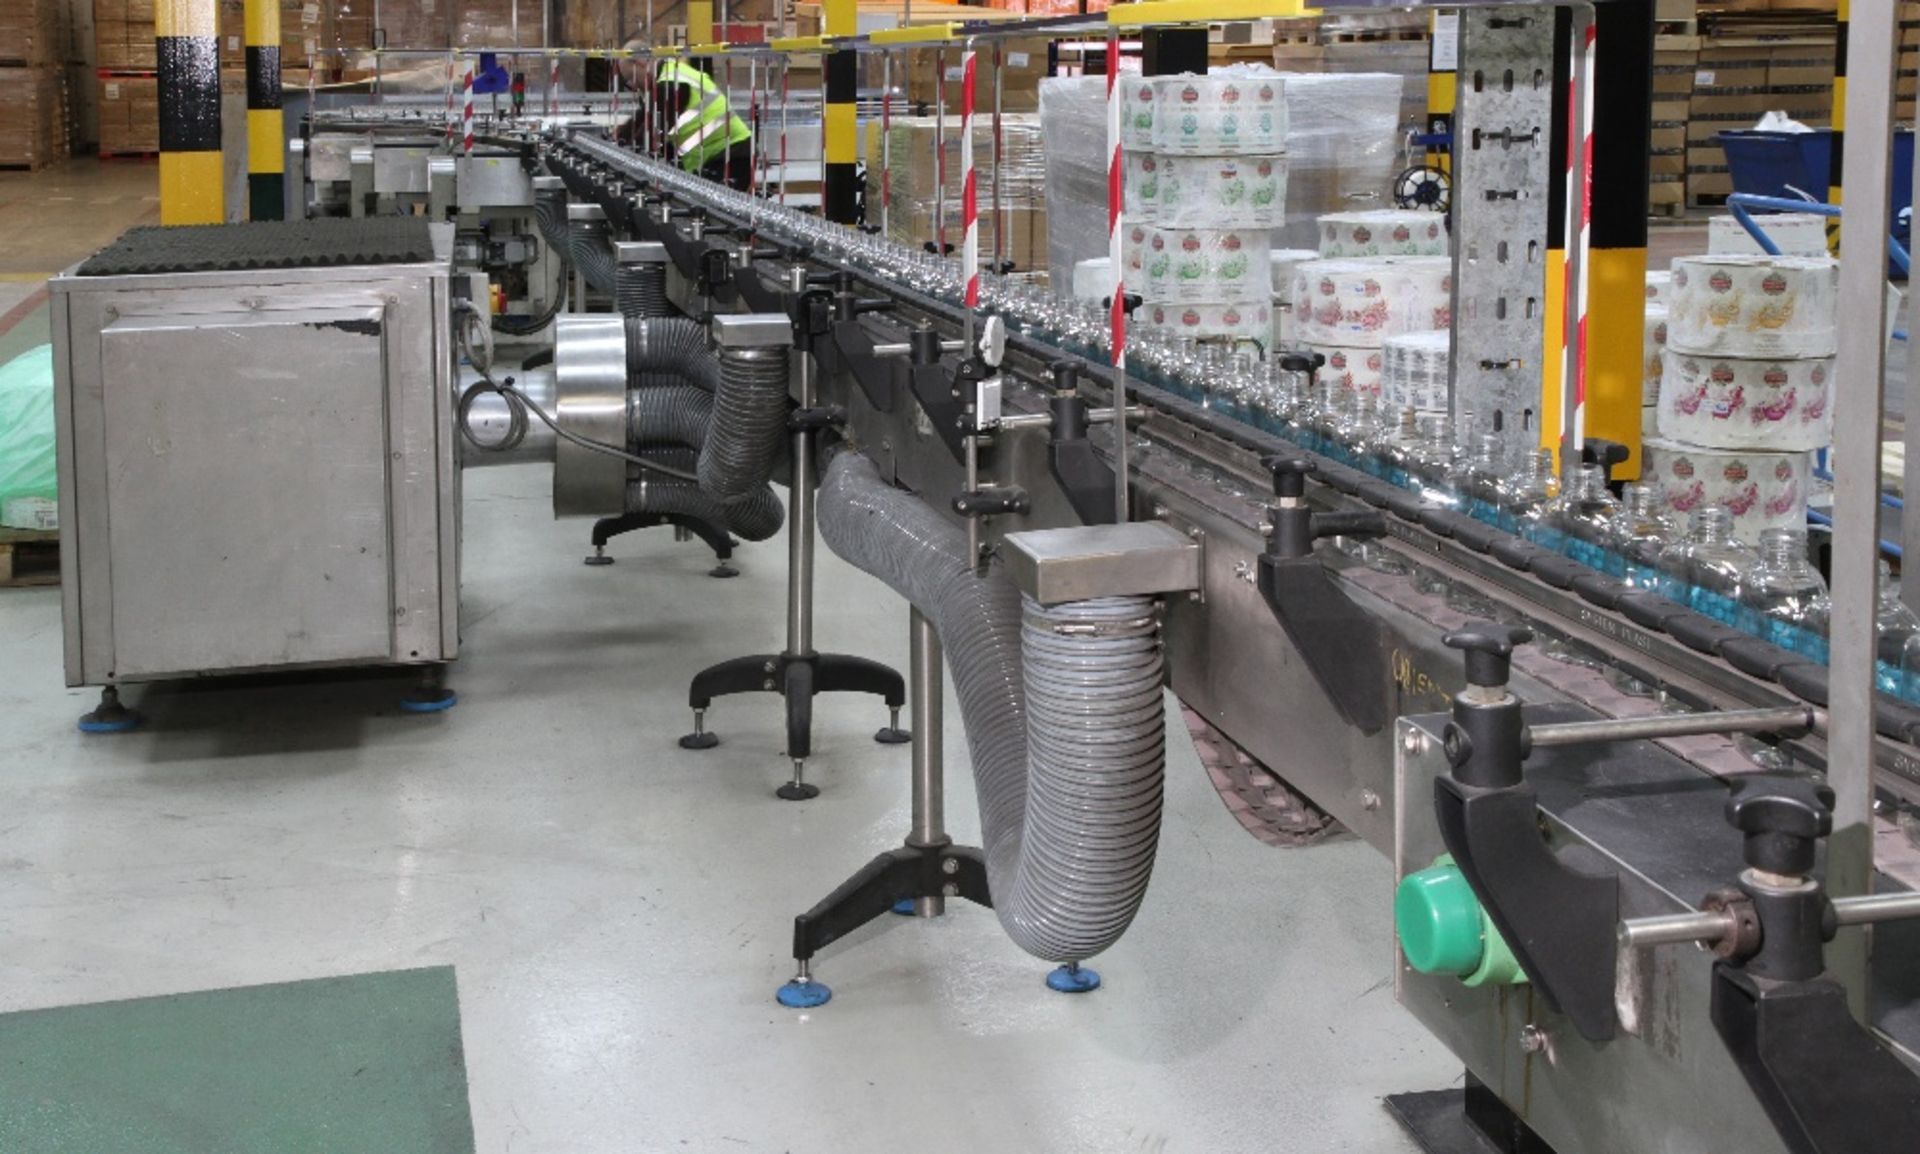 Contents Of World Class Manufacturer's Bottling Line. - Image 15 of 87